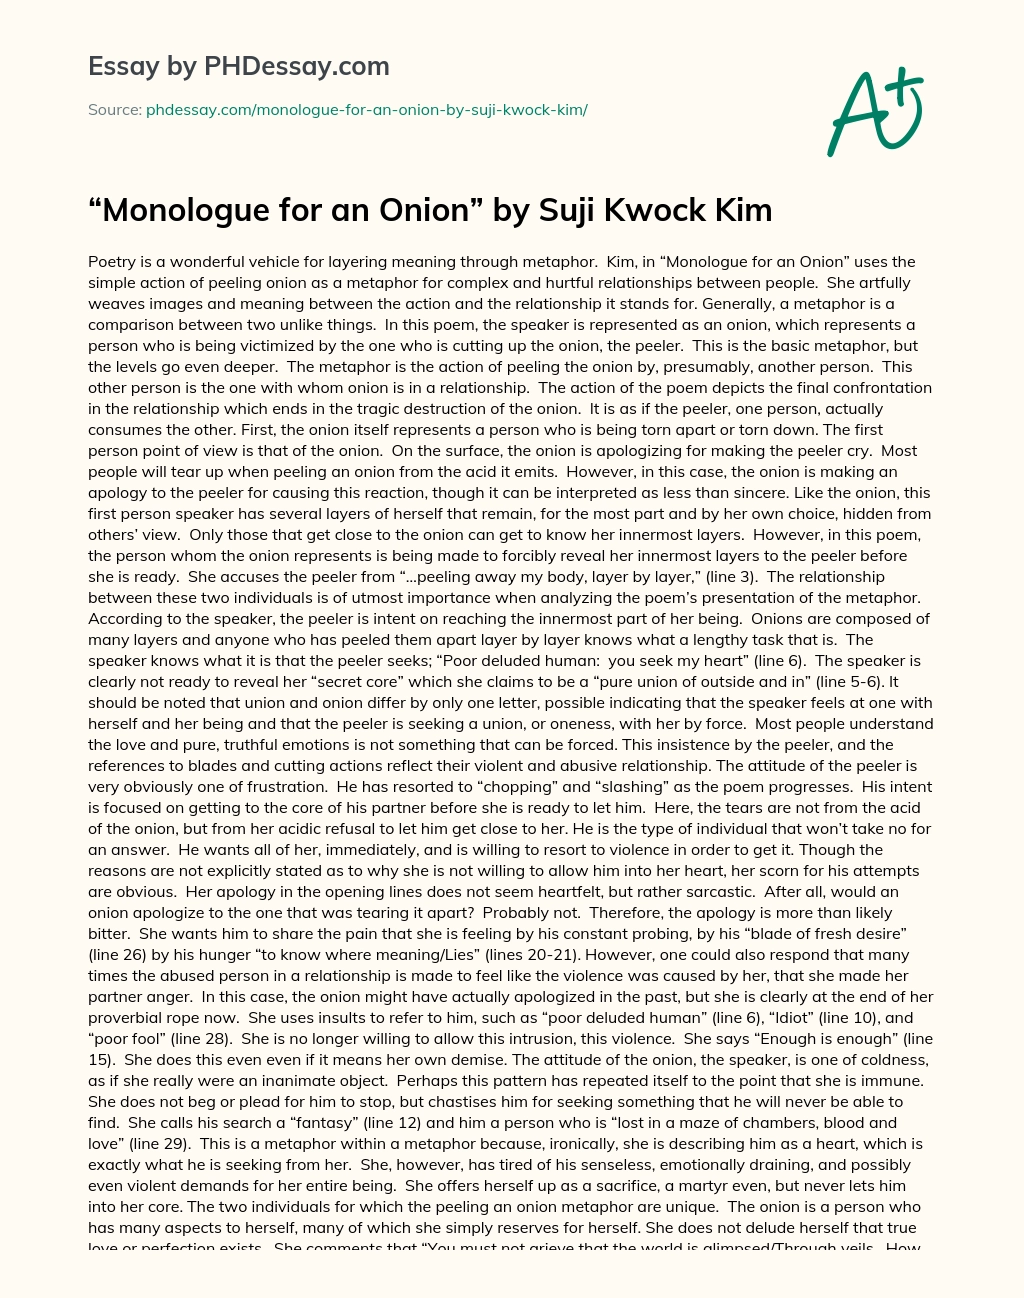 Monologue for an Onion by Suji Kwock Kim essay